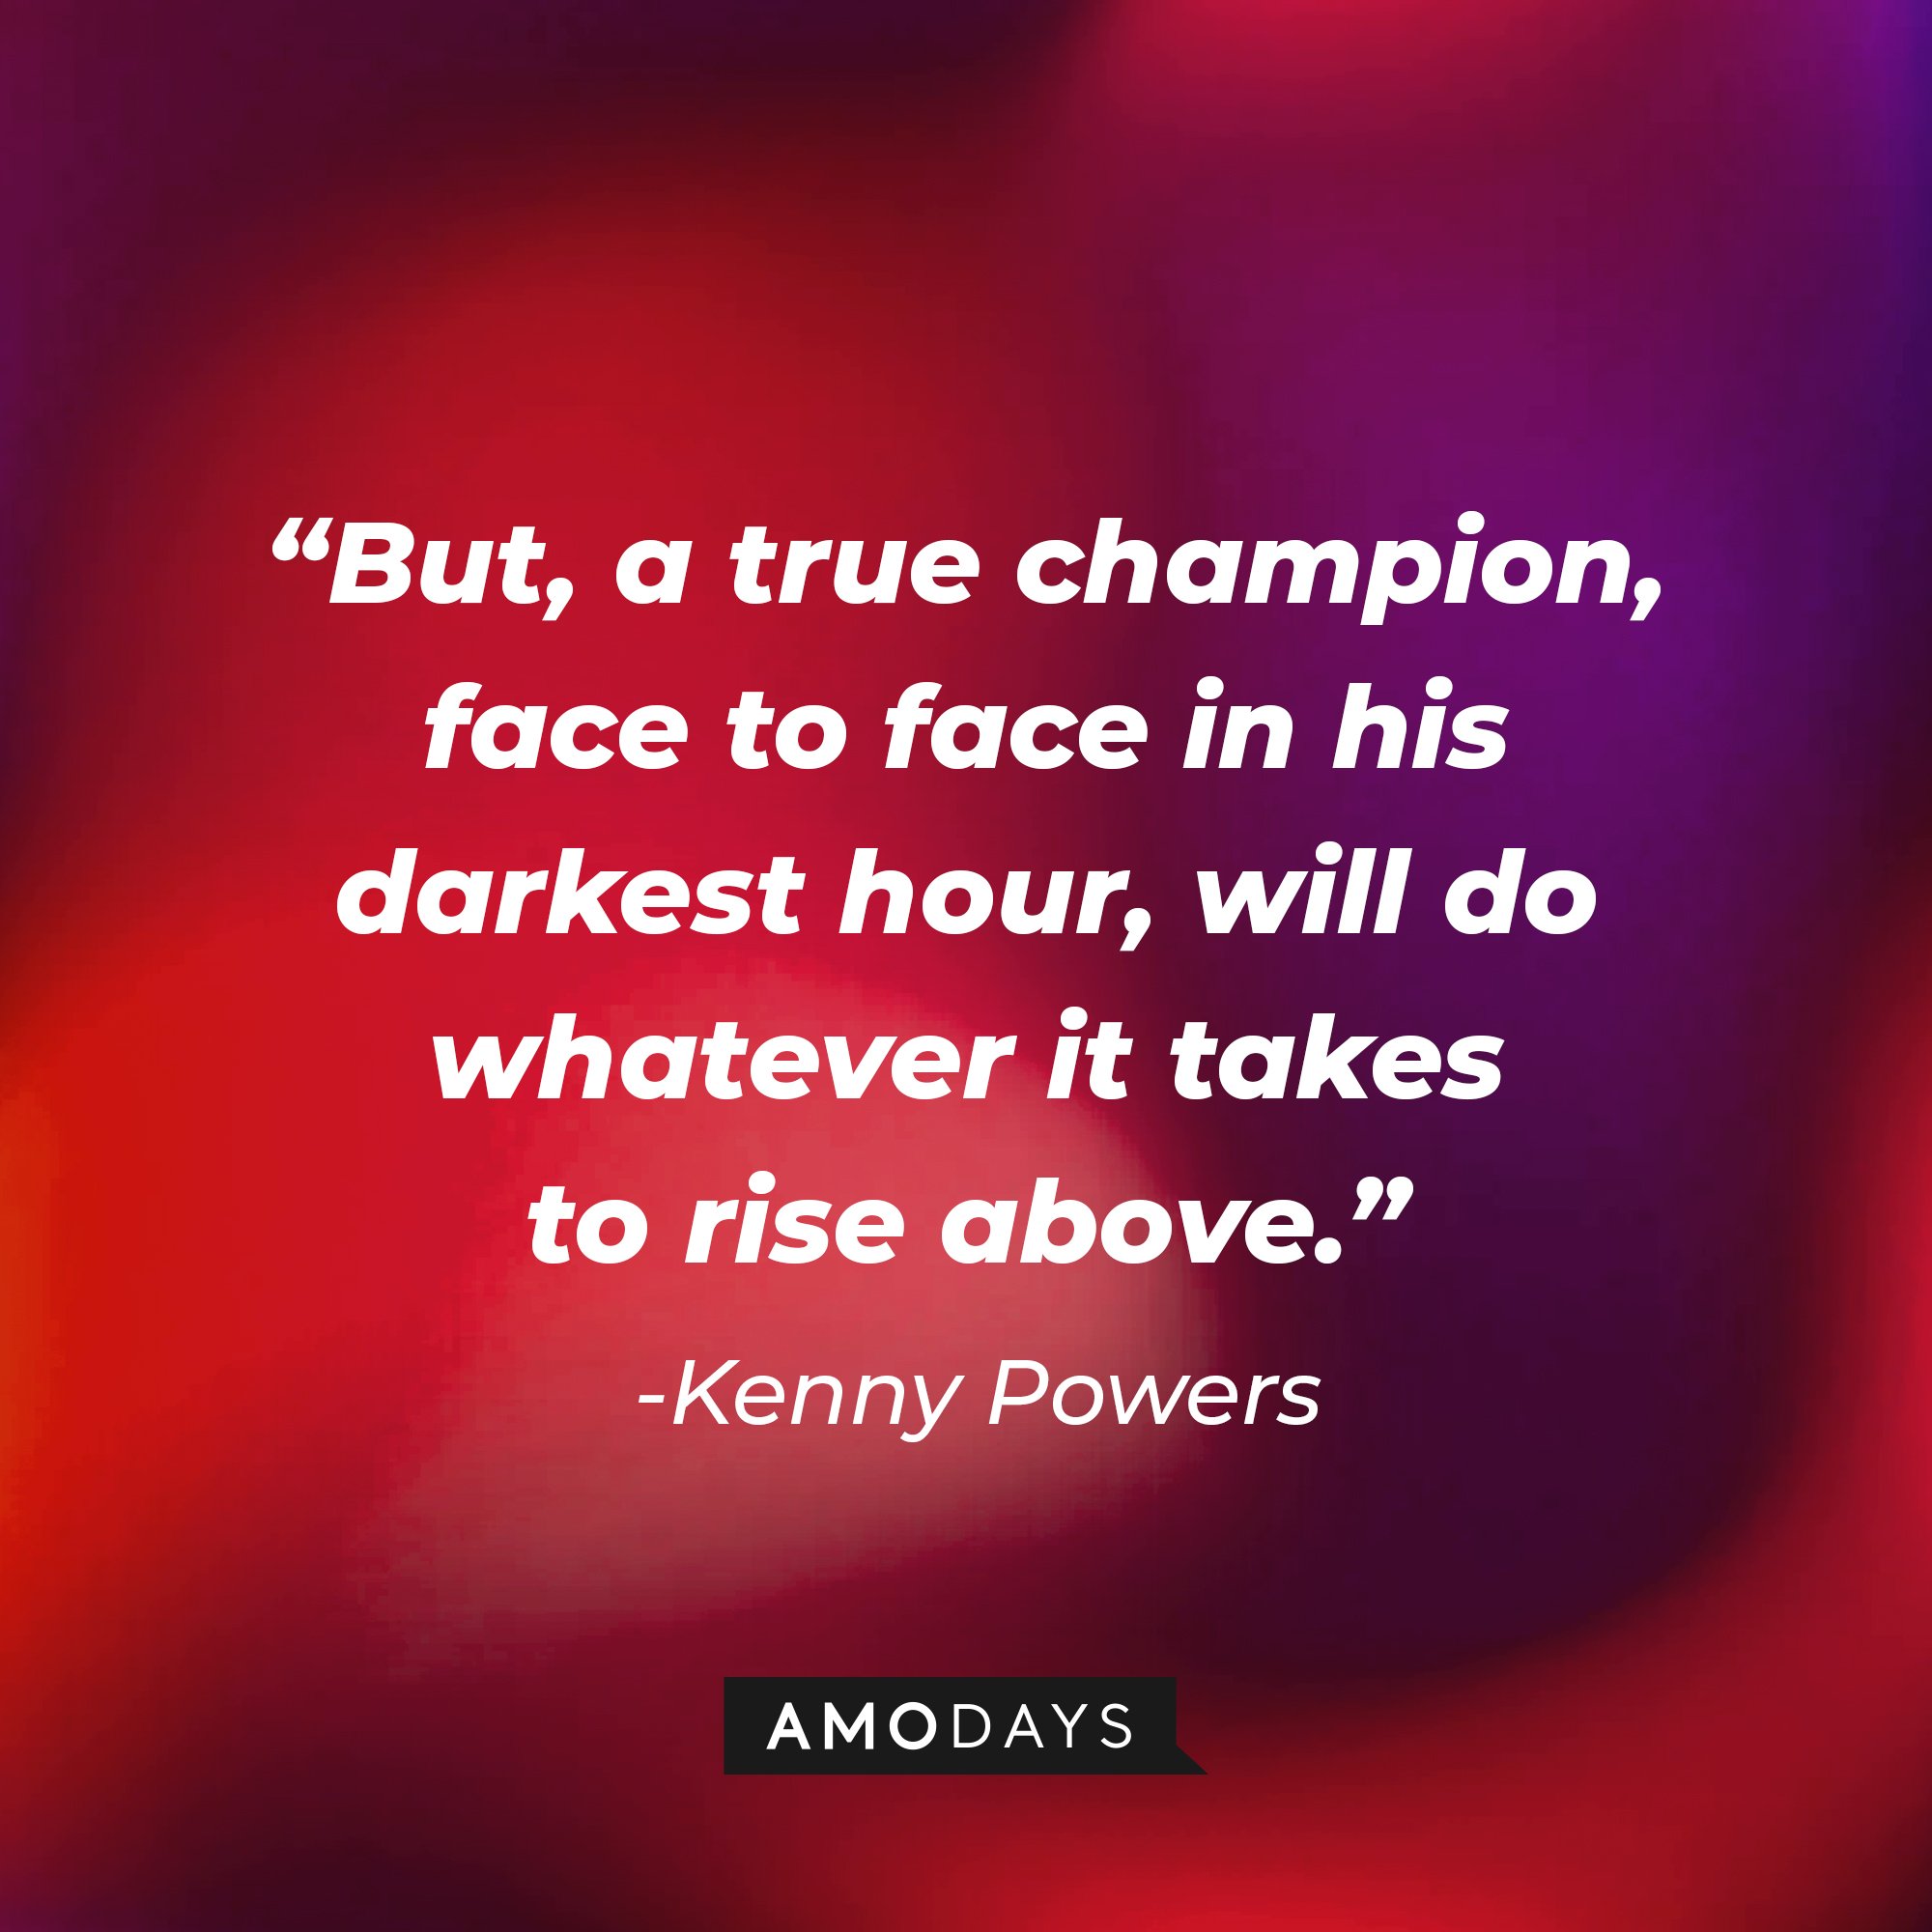 Kenny Powers' quote: "But, a true champion, face to face in his darkest hour, will do whatever it takes to rise above.” | Image: AmoDays